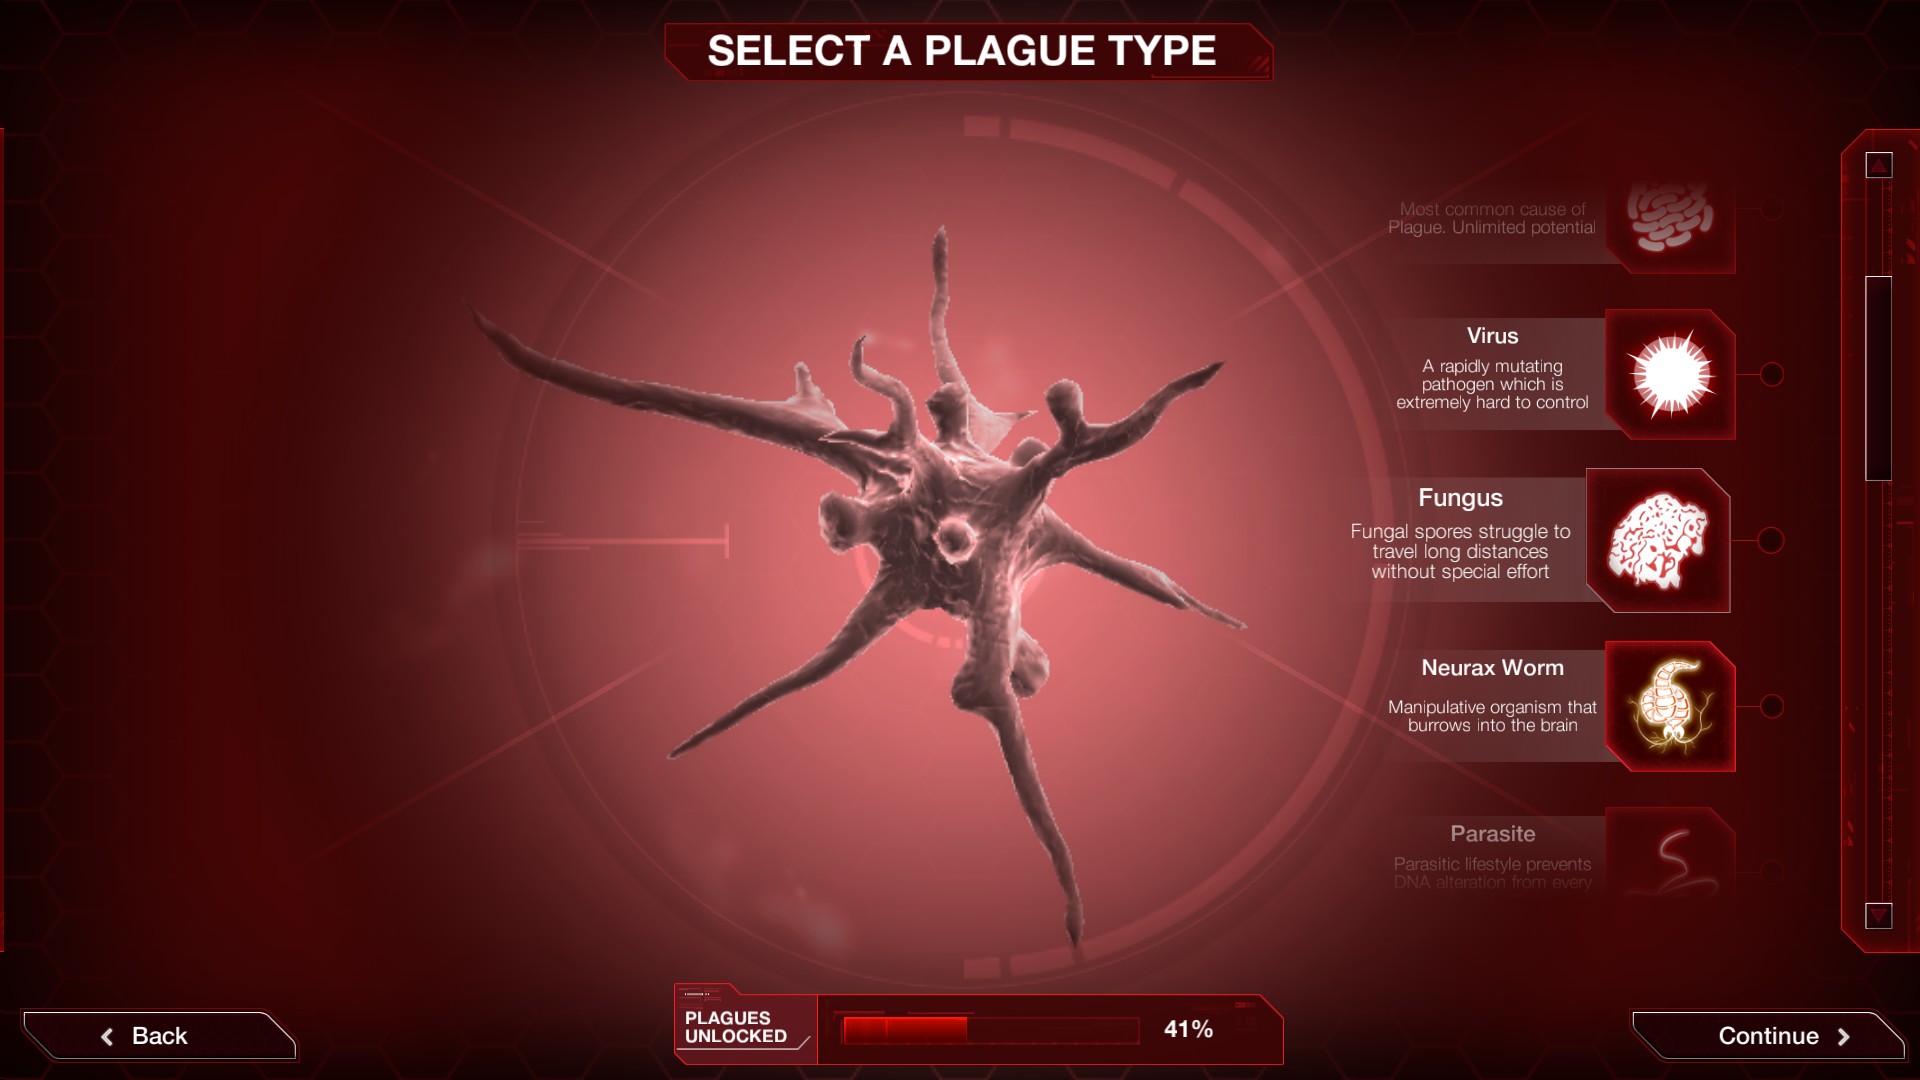 Best mobile strategy games: Plague Inc. Image shows a selection of different plagues, including viral, fungal, Neurax Worm, and parasite. 